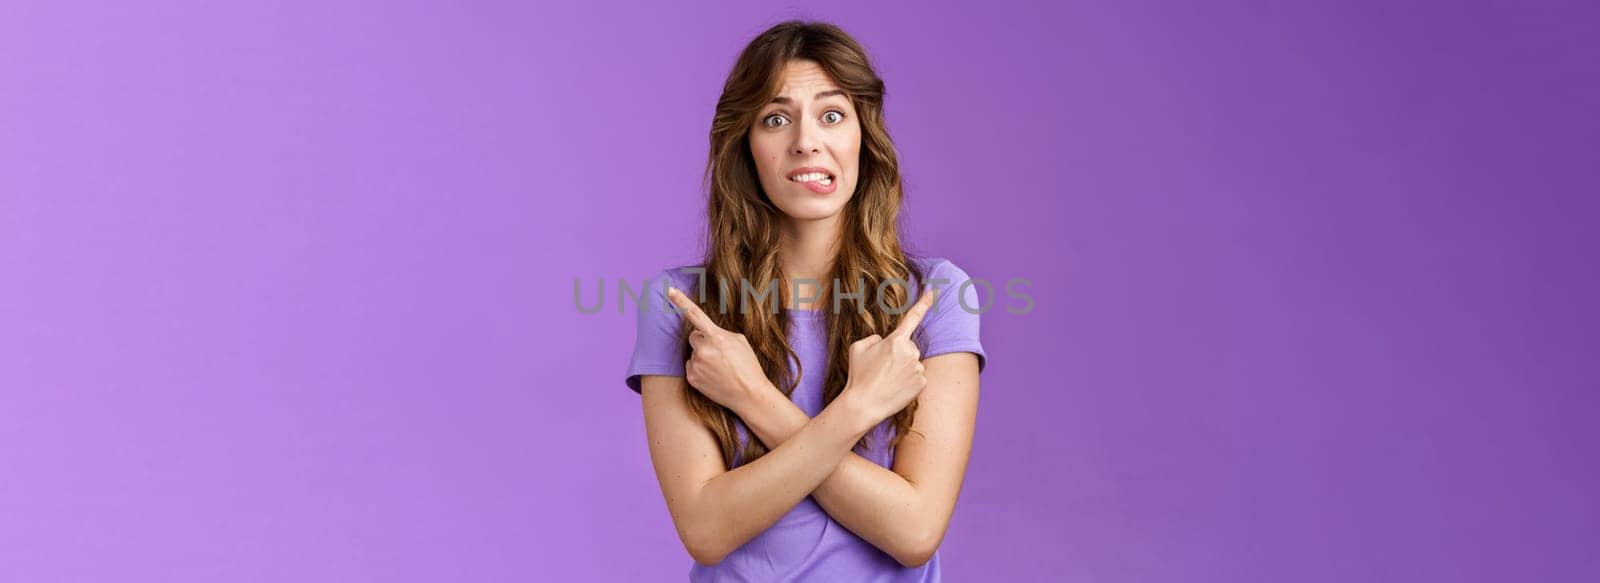 Perplexed timid hesitant worried girlfriend afraid making bad choice cross hands pointing sideways indicating left right perplexed decide frowning pull hesitant face asking advice purple background by Benzoix